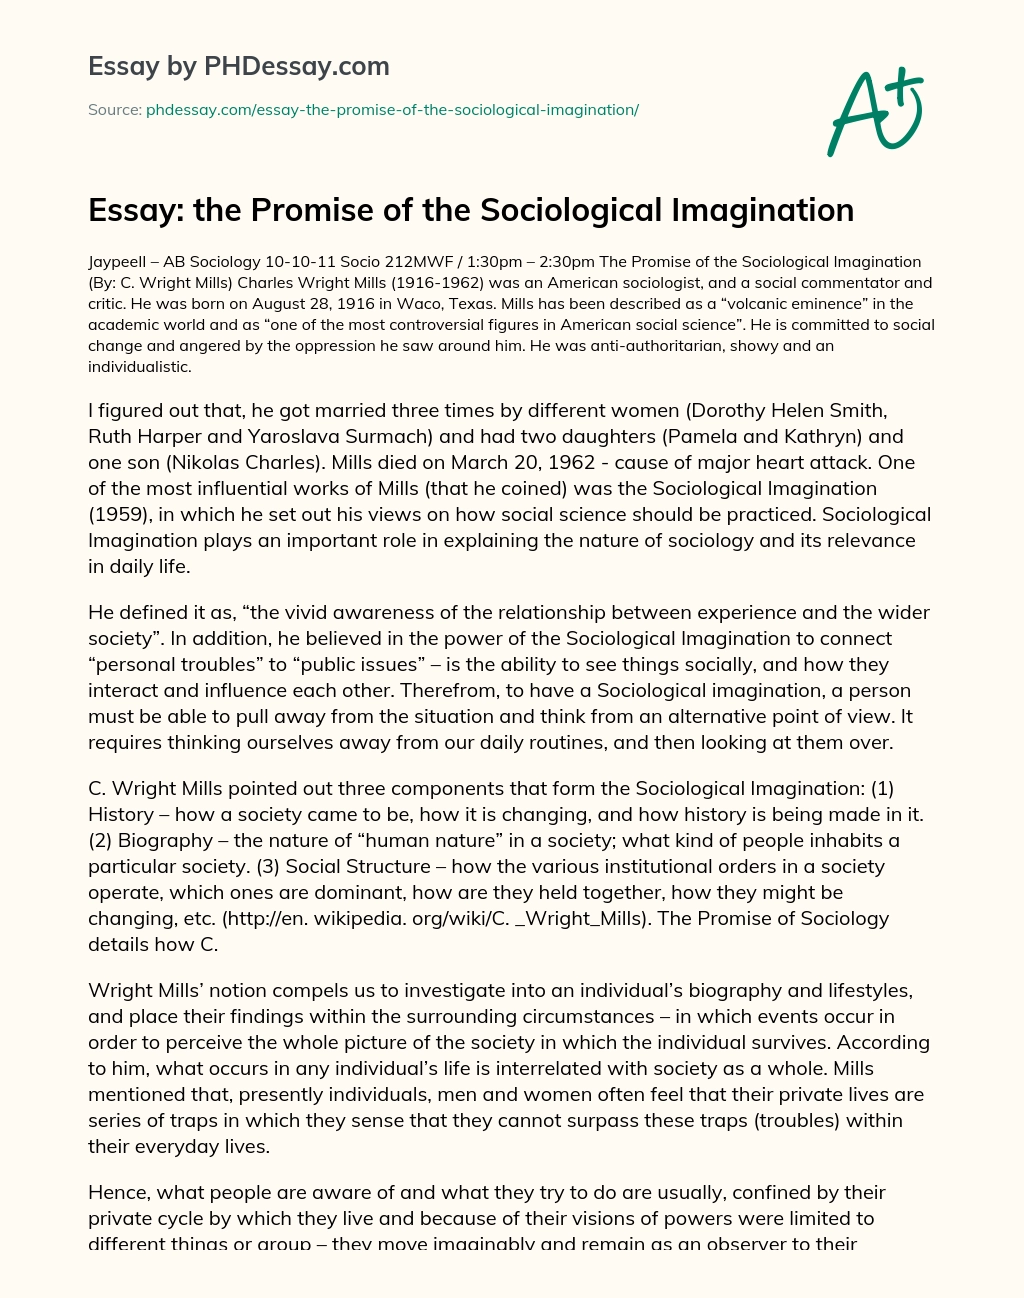 Essay: the Promise of the Sociological Imagination essay